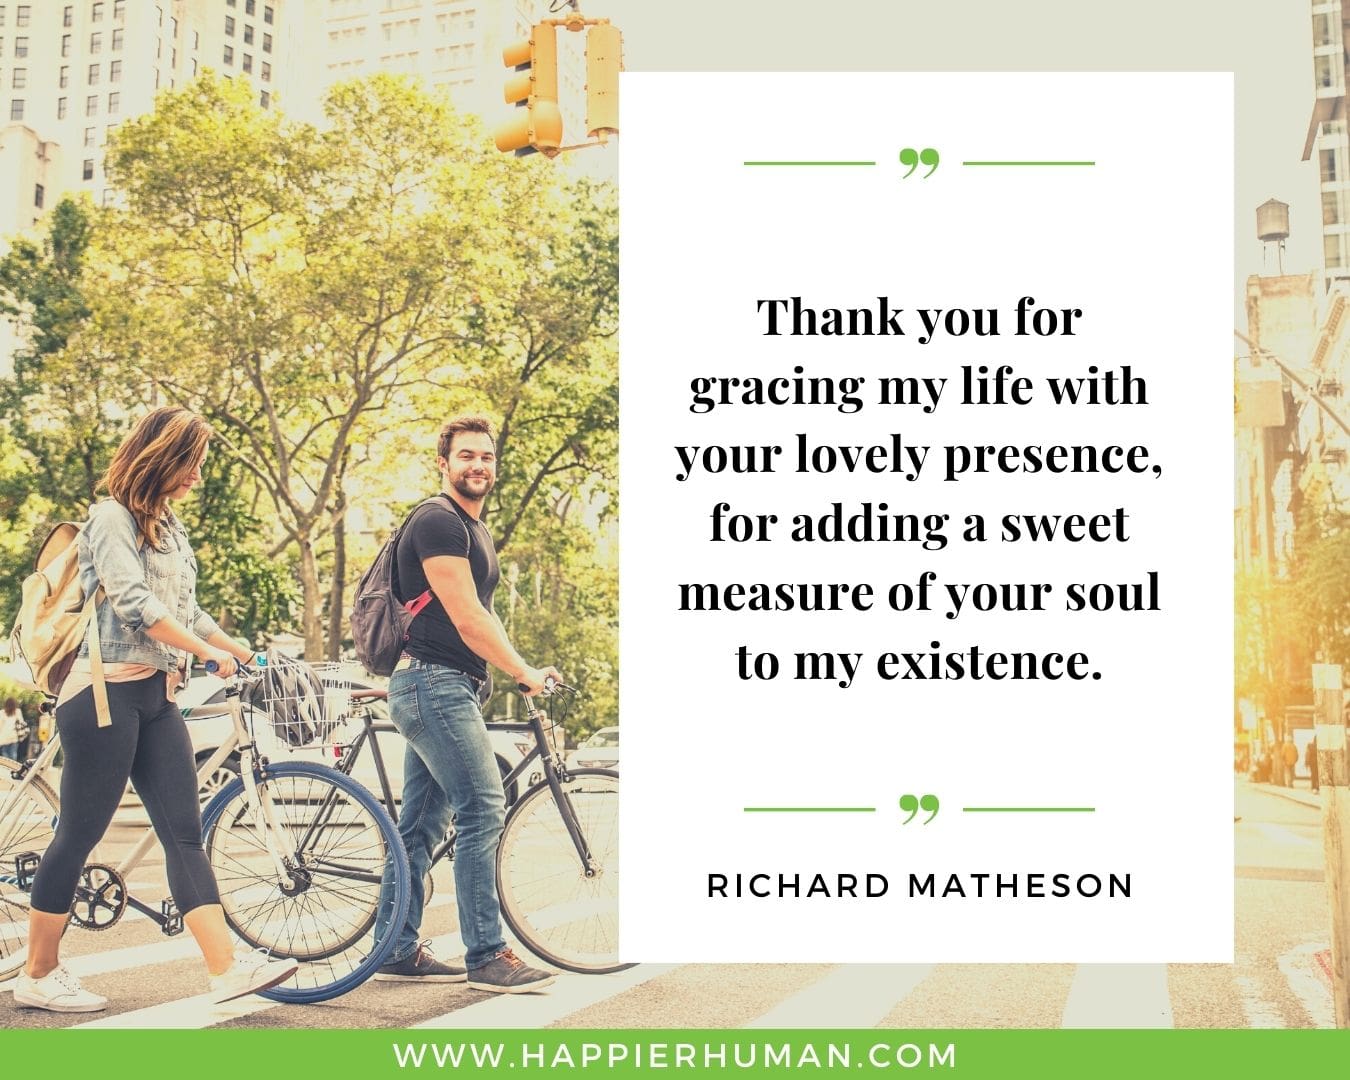 I’m Here for You Quotes - “Thank you for gracing my life with your lovely presence, for adding a sweet measure of your soul to my existence.” – Richard Matheson